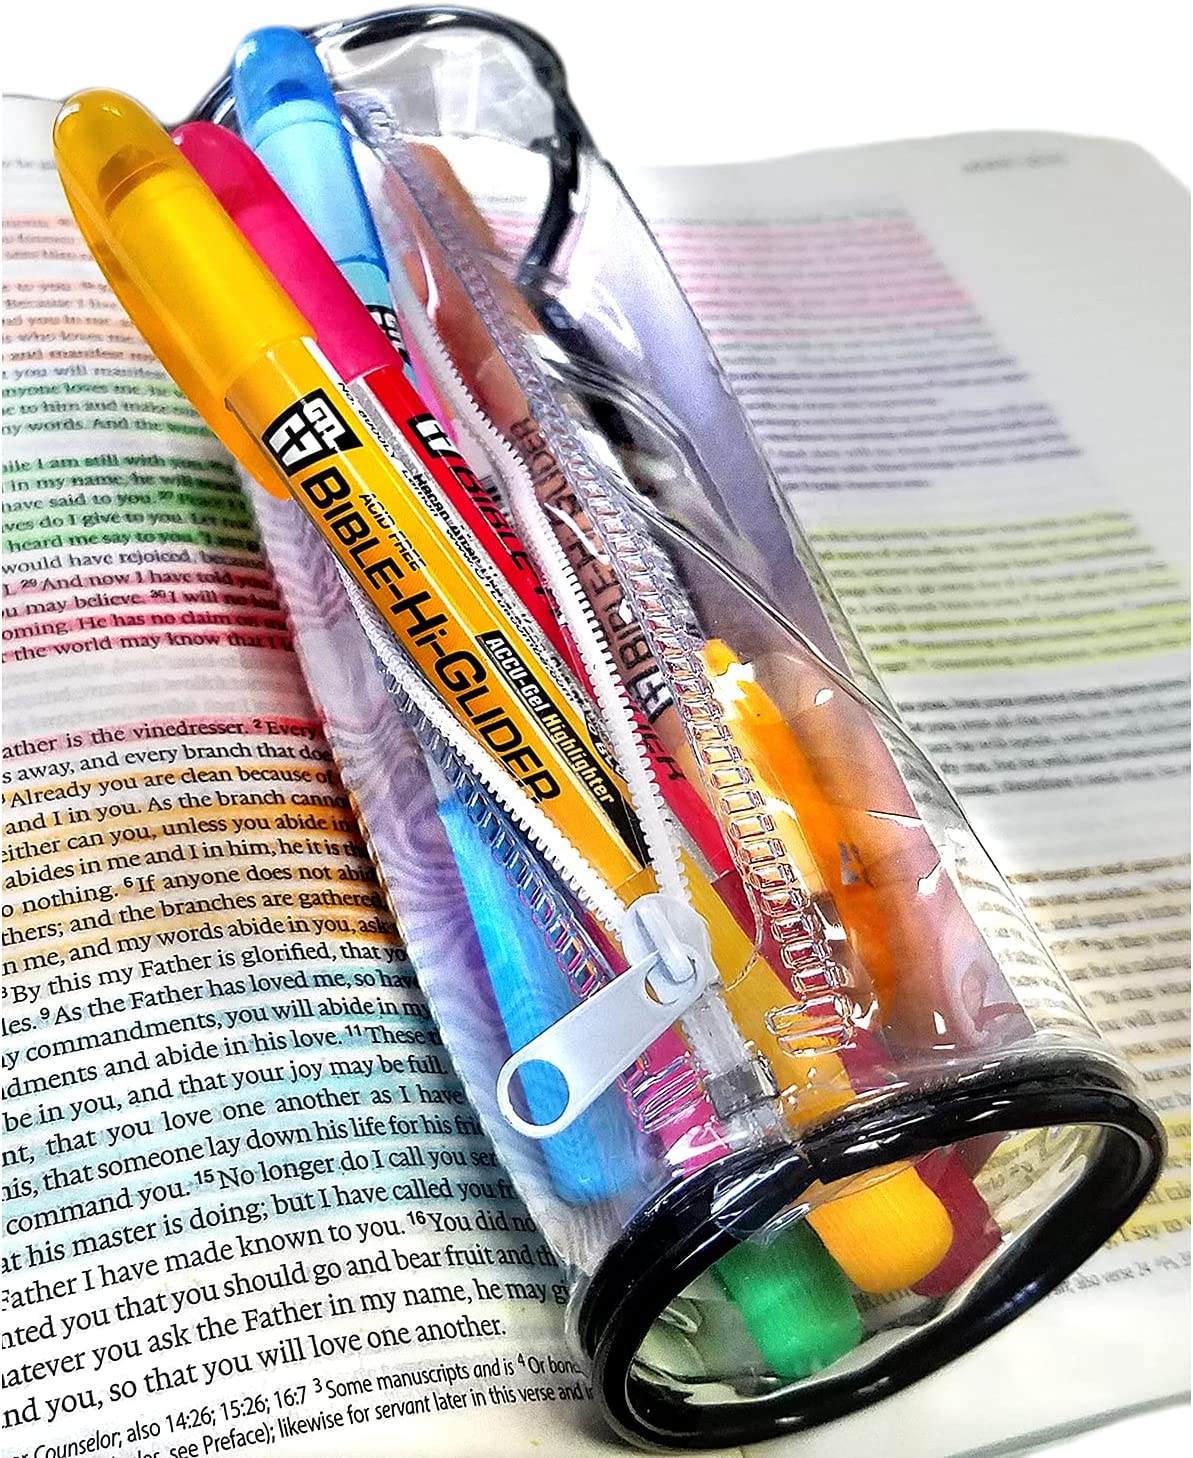 BLIEVE- Bible Study Kit With Gel Highlighters And Pens No Bleed Through,  Amazing Bible Highlighter and Pens Fine Tip set Planner Supplies Gifts (10